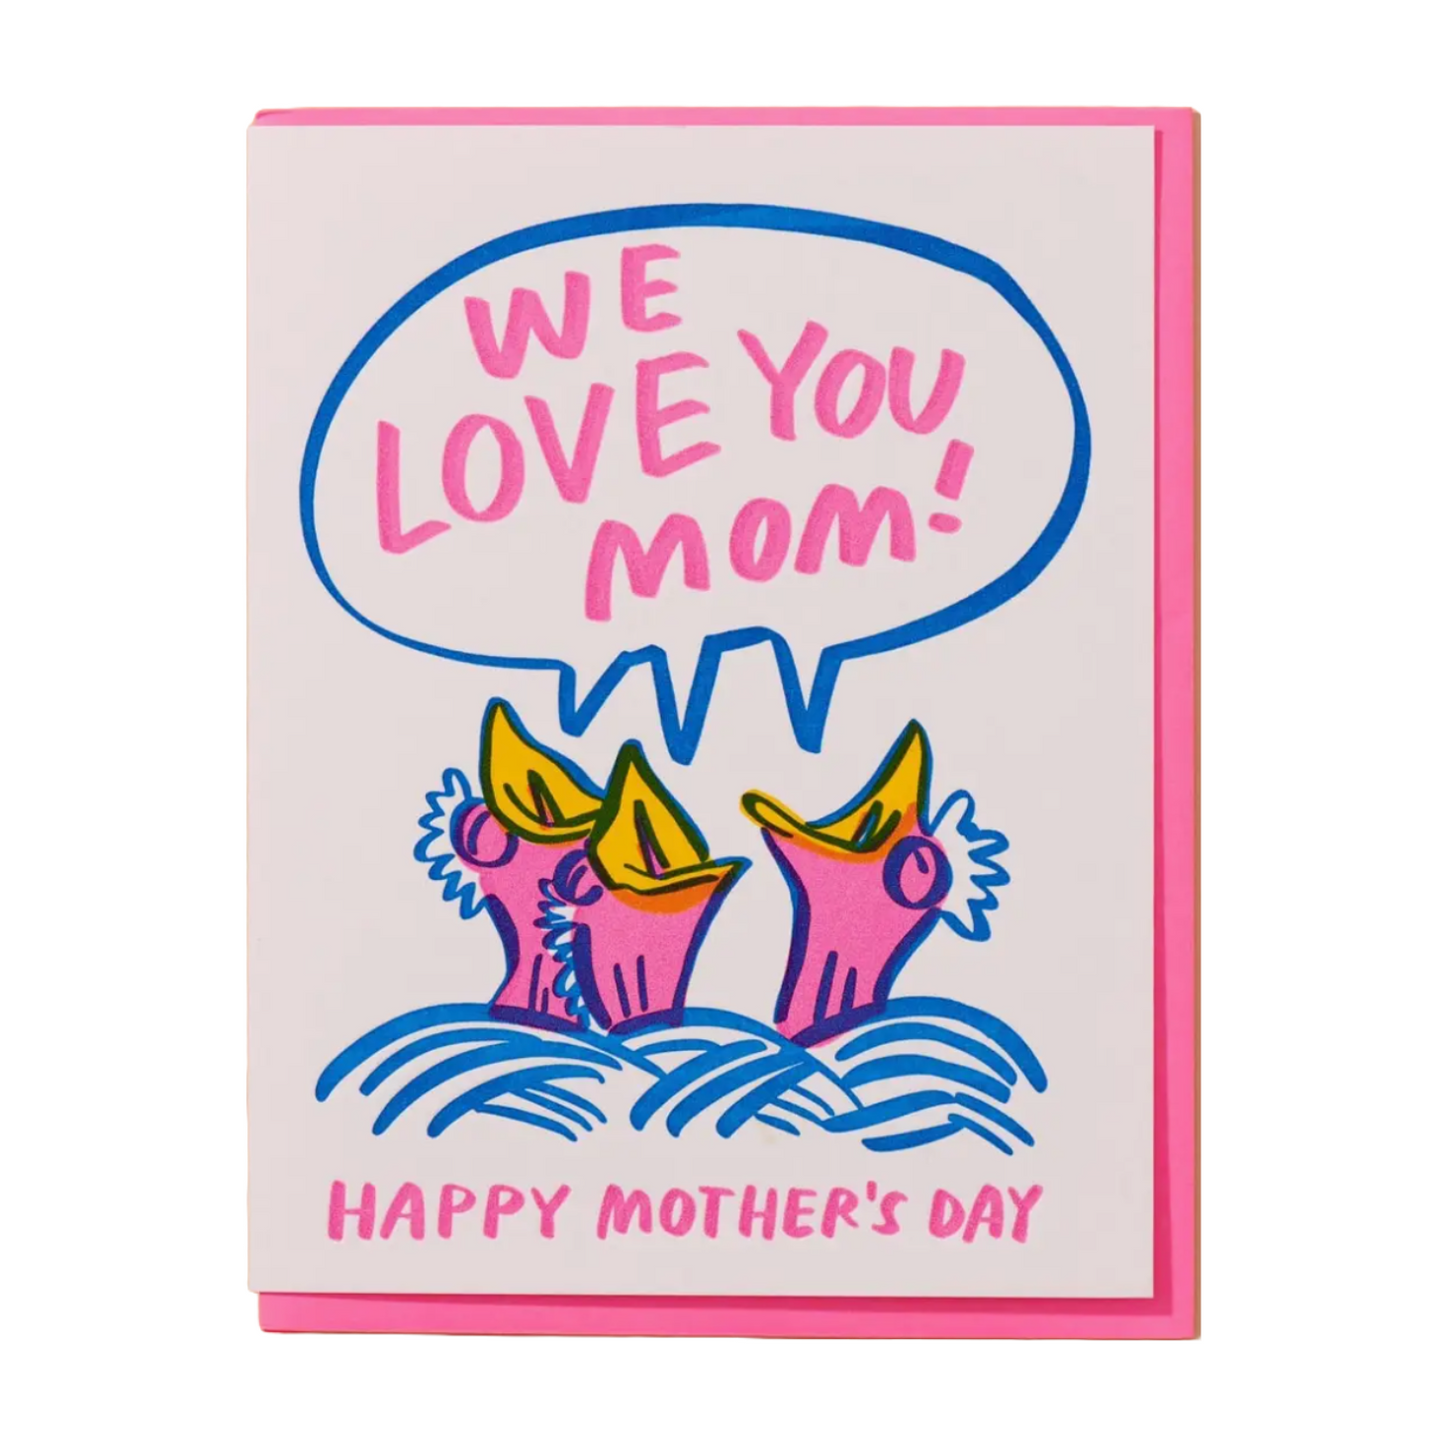 We Love You Mom Card by And Here We Are